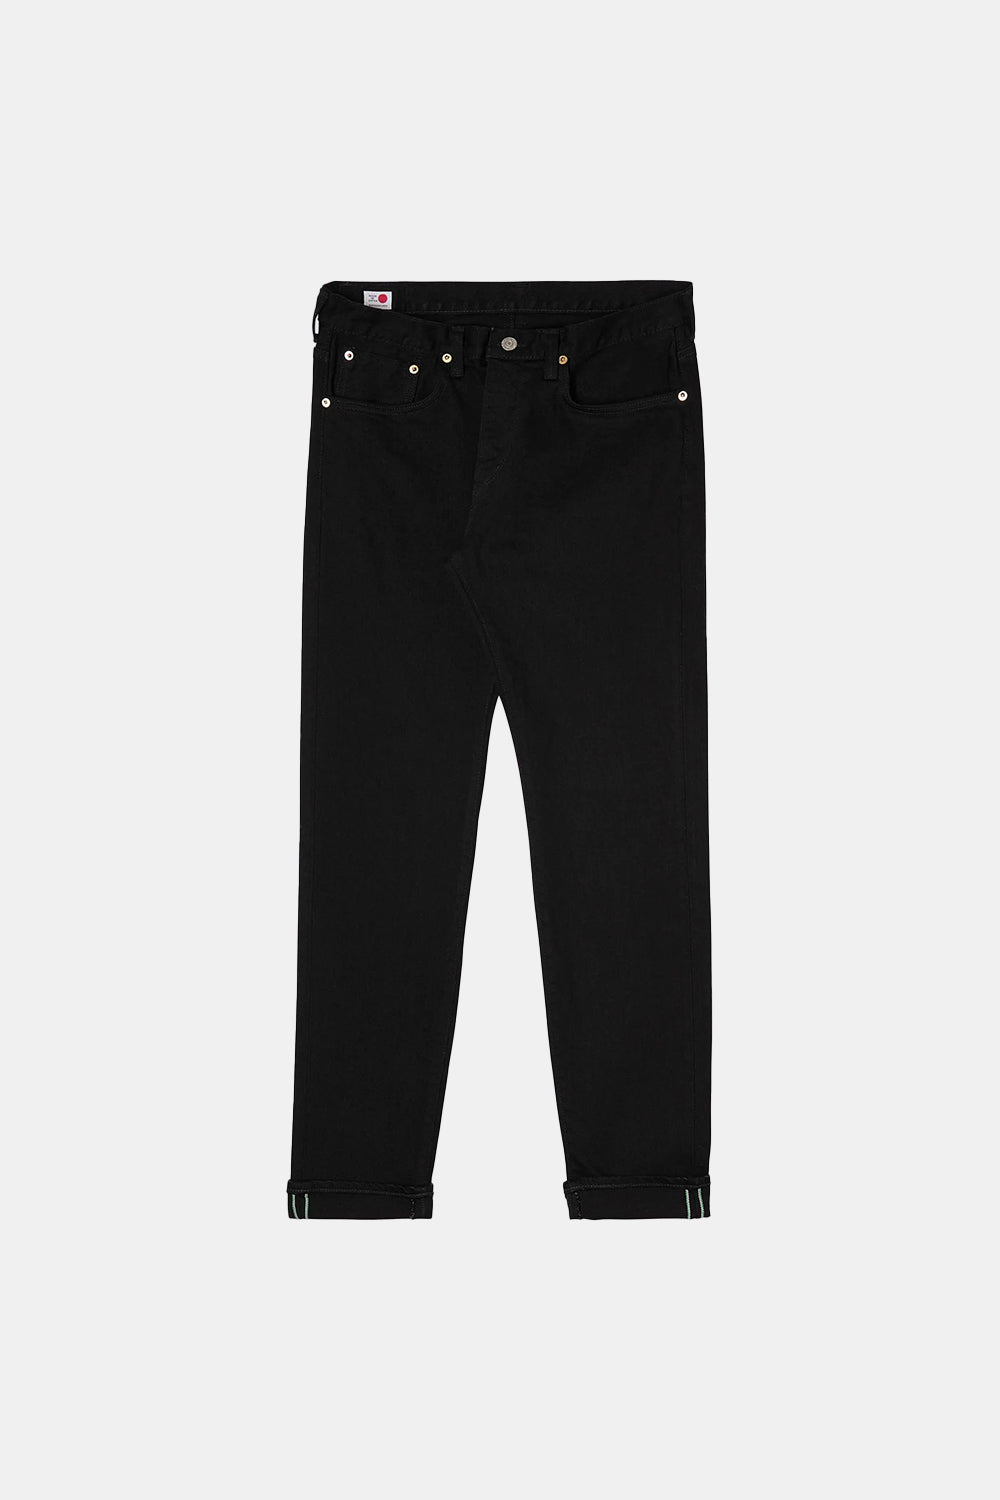 Edwin Regular Tapered Kaihara Black Rinsed Jeans (Green & White Selvage) | Number Six